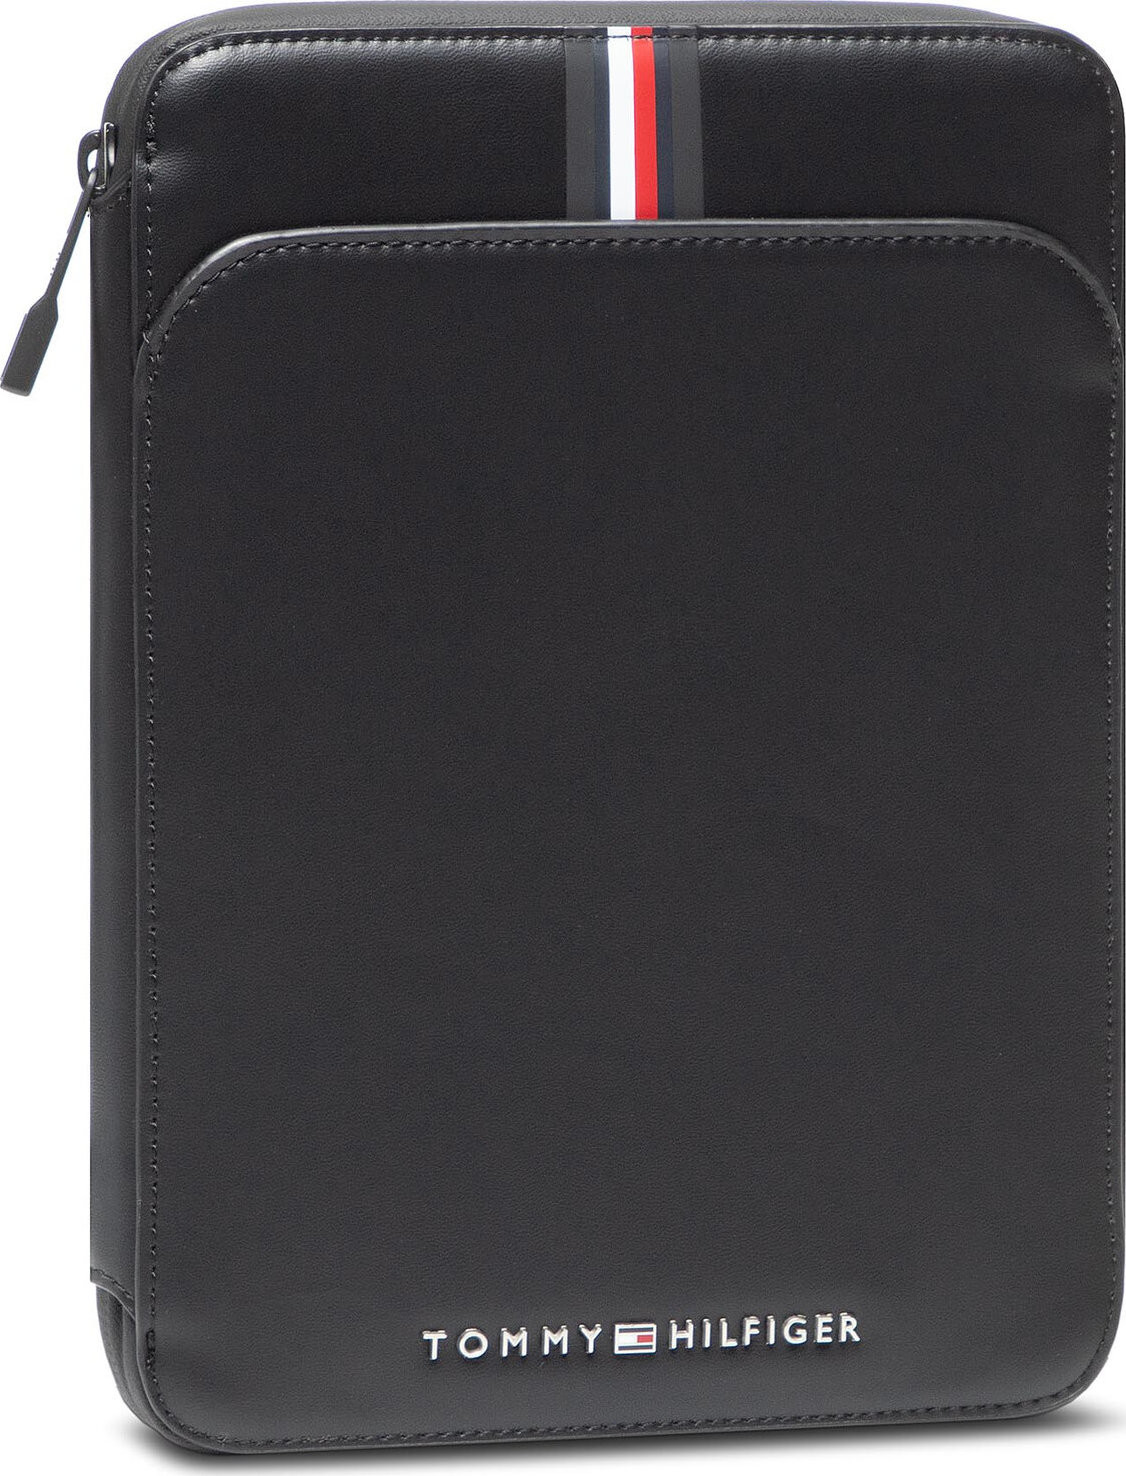 Pouzdro na tablet Tommy Hilfiger Th Commuter Travel Pouch AM0AM07843 BDS